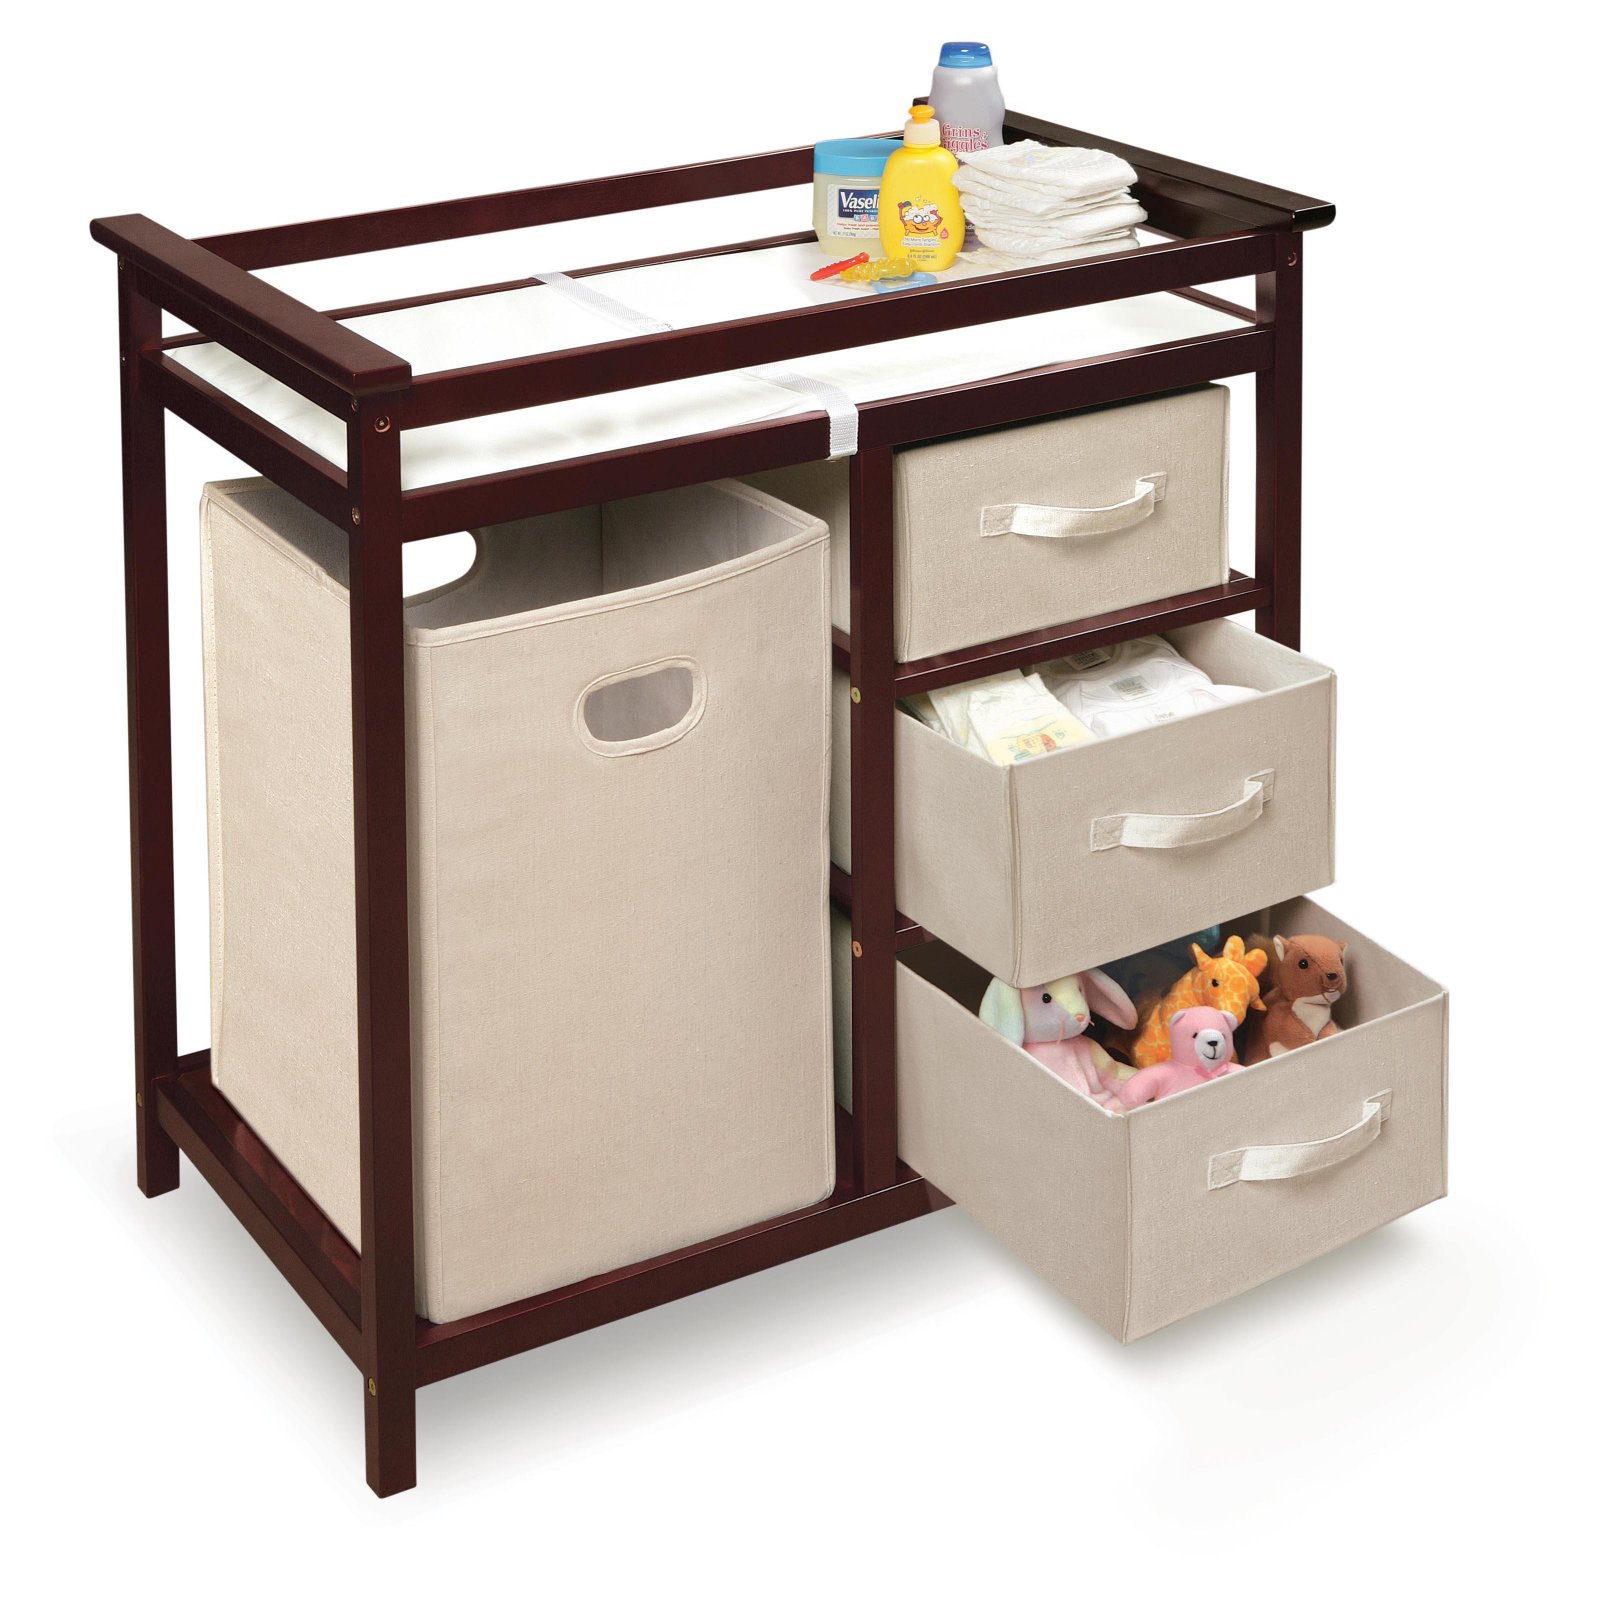 Badger Basket Modern Baby Changing Table with Hamper and 3 Baskets, White, Includes Pad - image 5 of 6